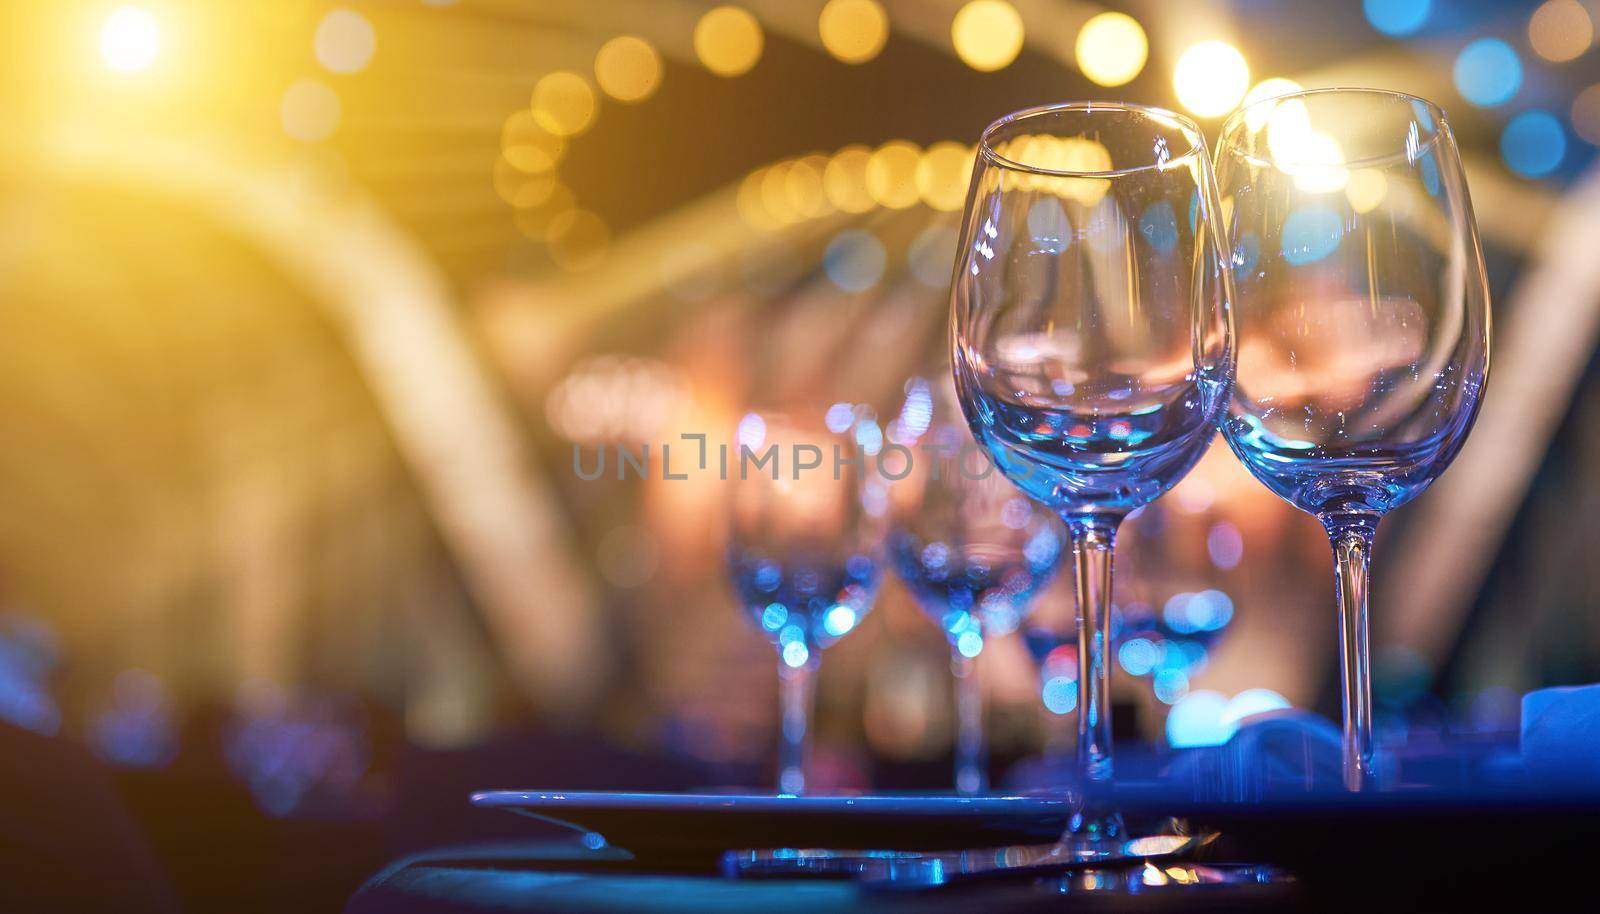 A glass of wine on table with colorful backlight. High quality photo